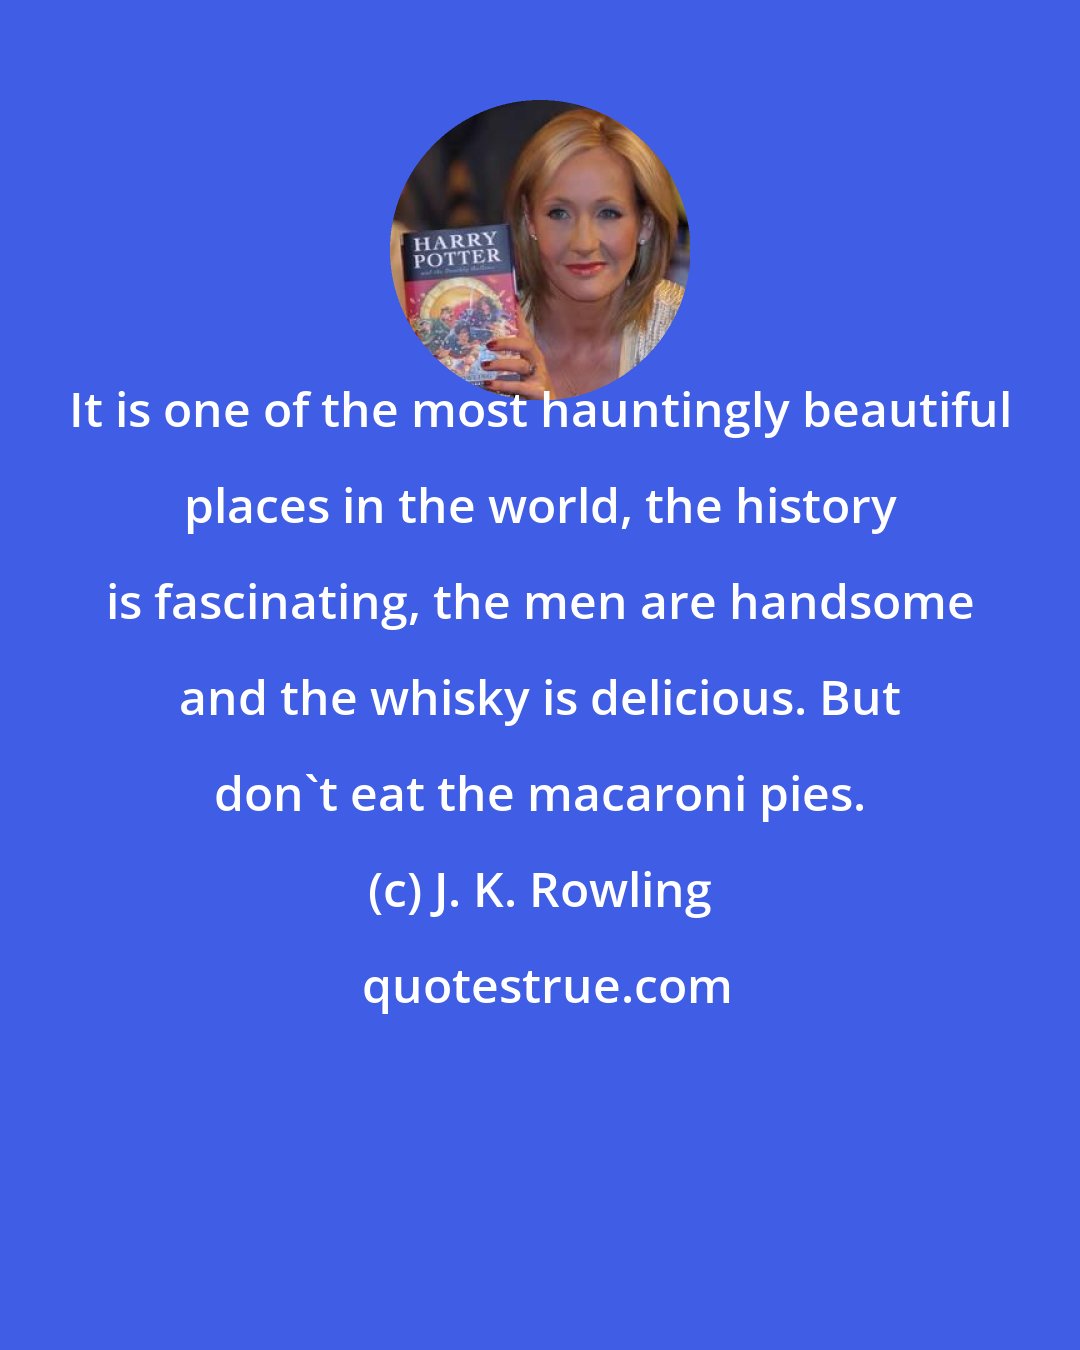 J. K. Rowling: It is one of the most hauntingly beautiful places in the world, the history is fascinating, the men are handsome and the whisky is delicious. But don't eat the macaroni pies.